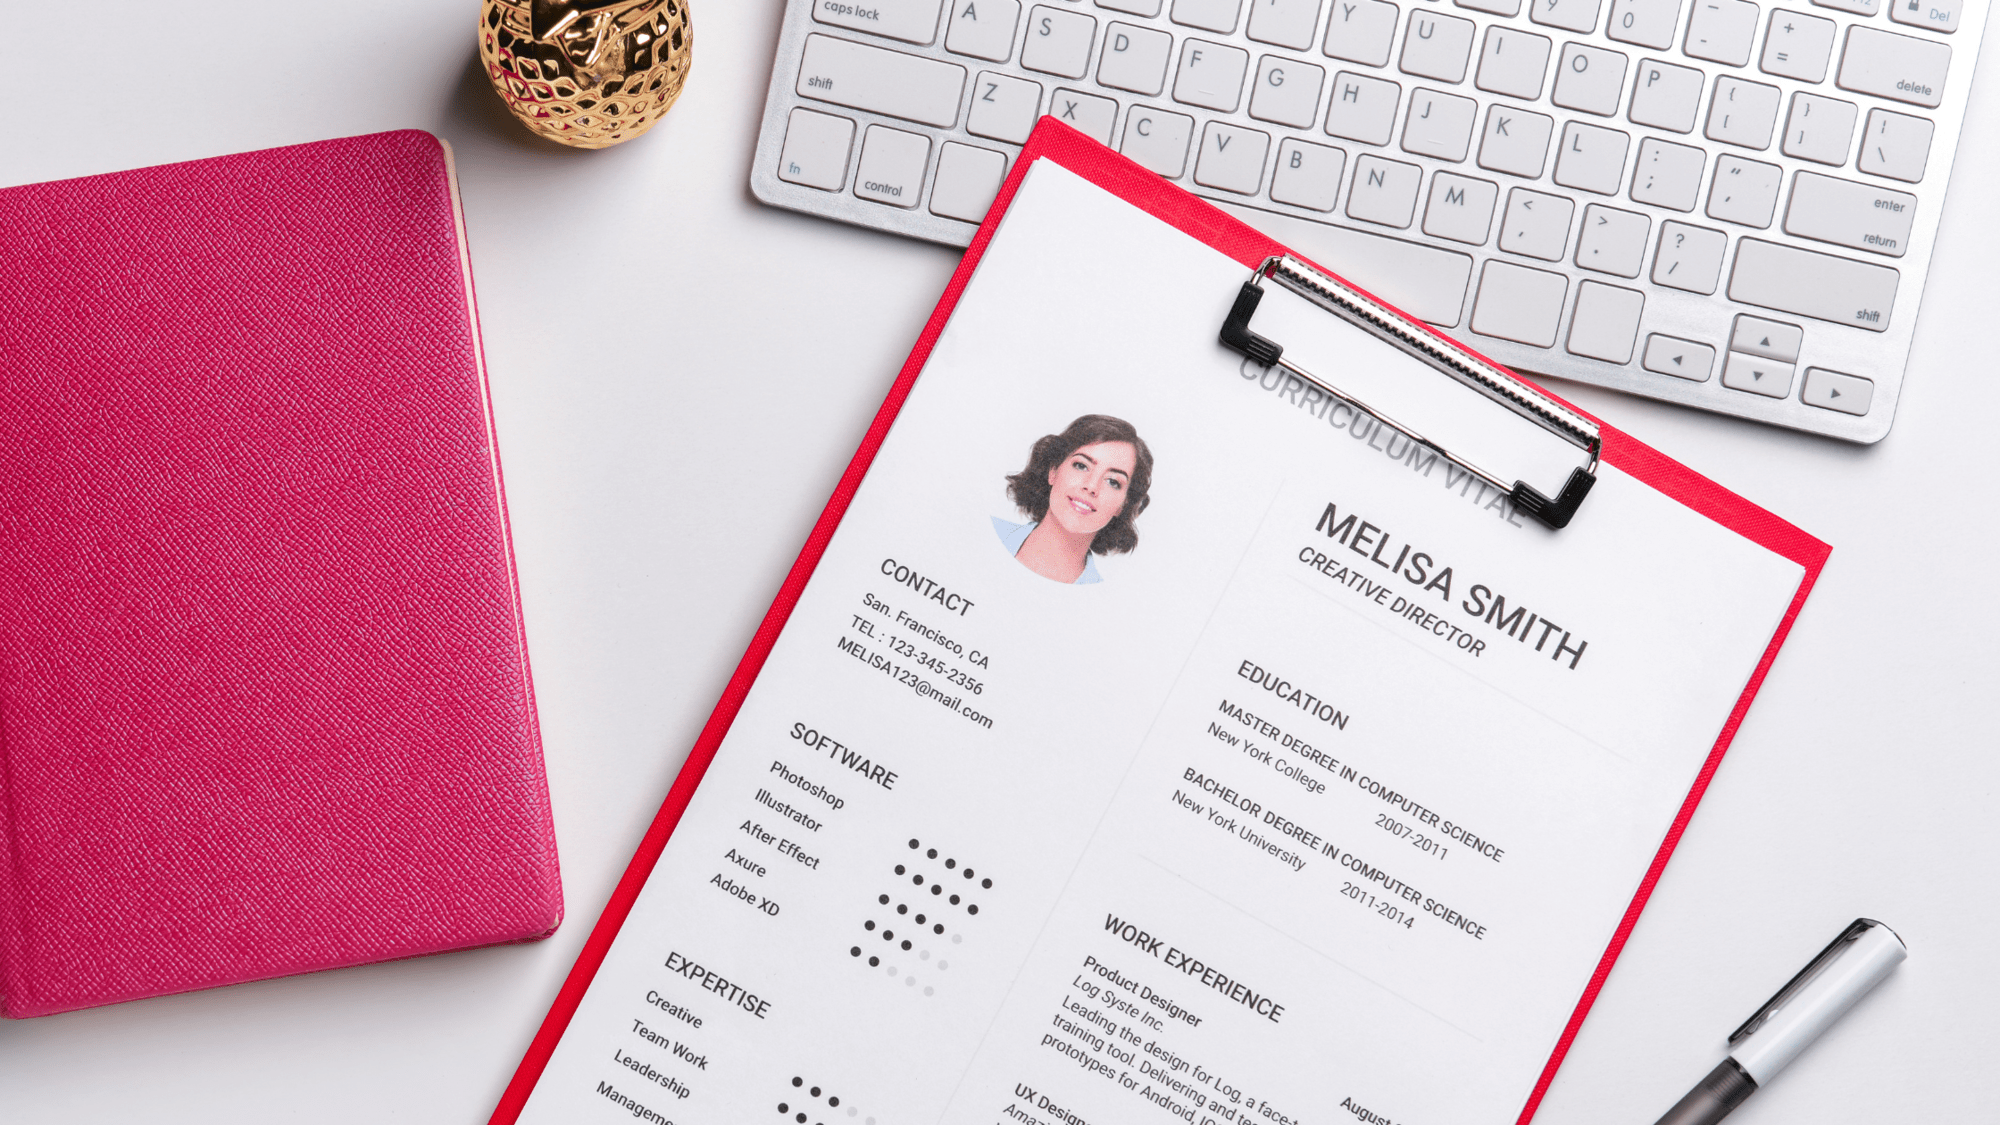 Land your dream job by following our guide to writing a resume